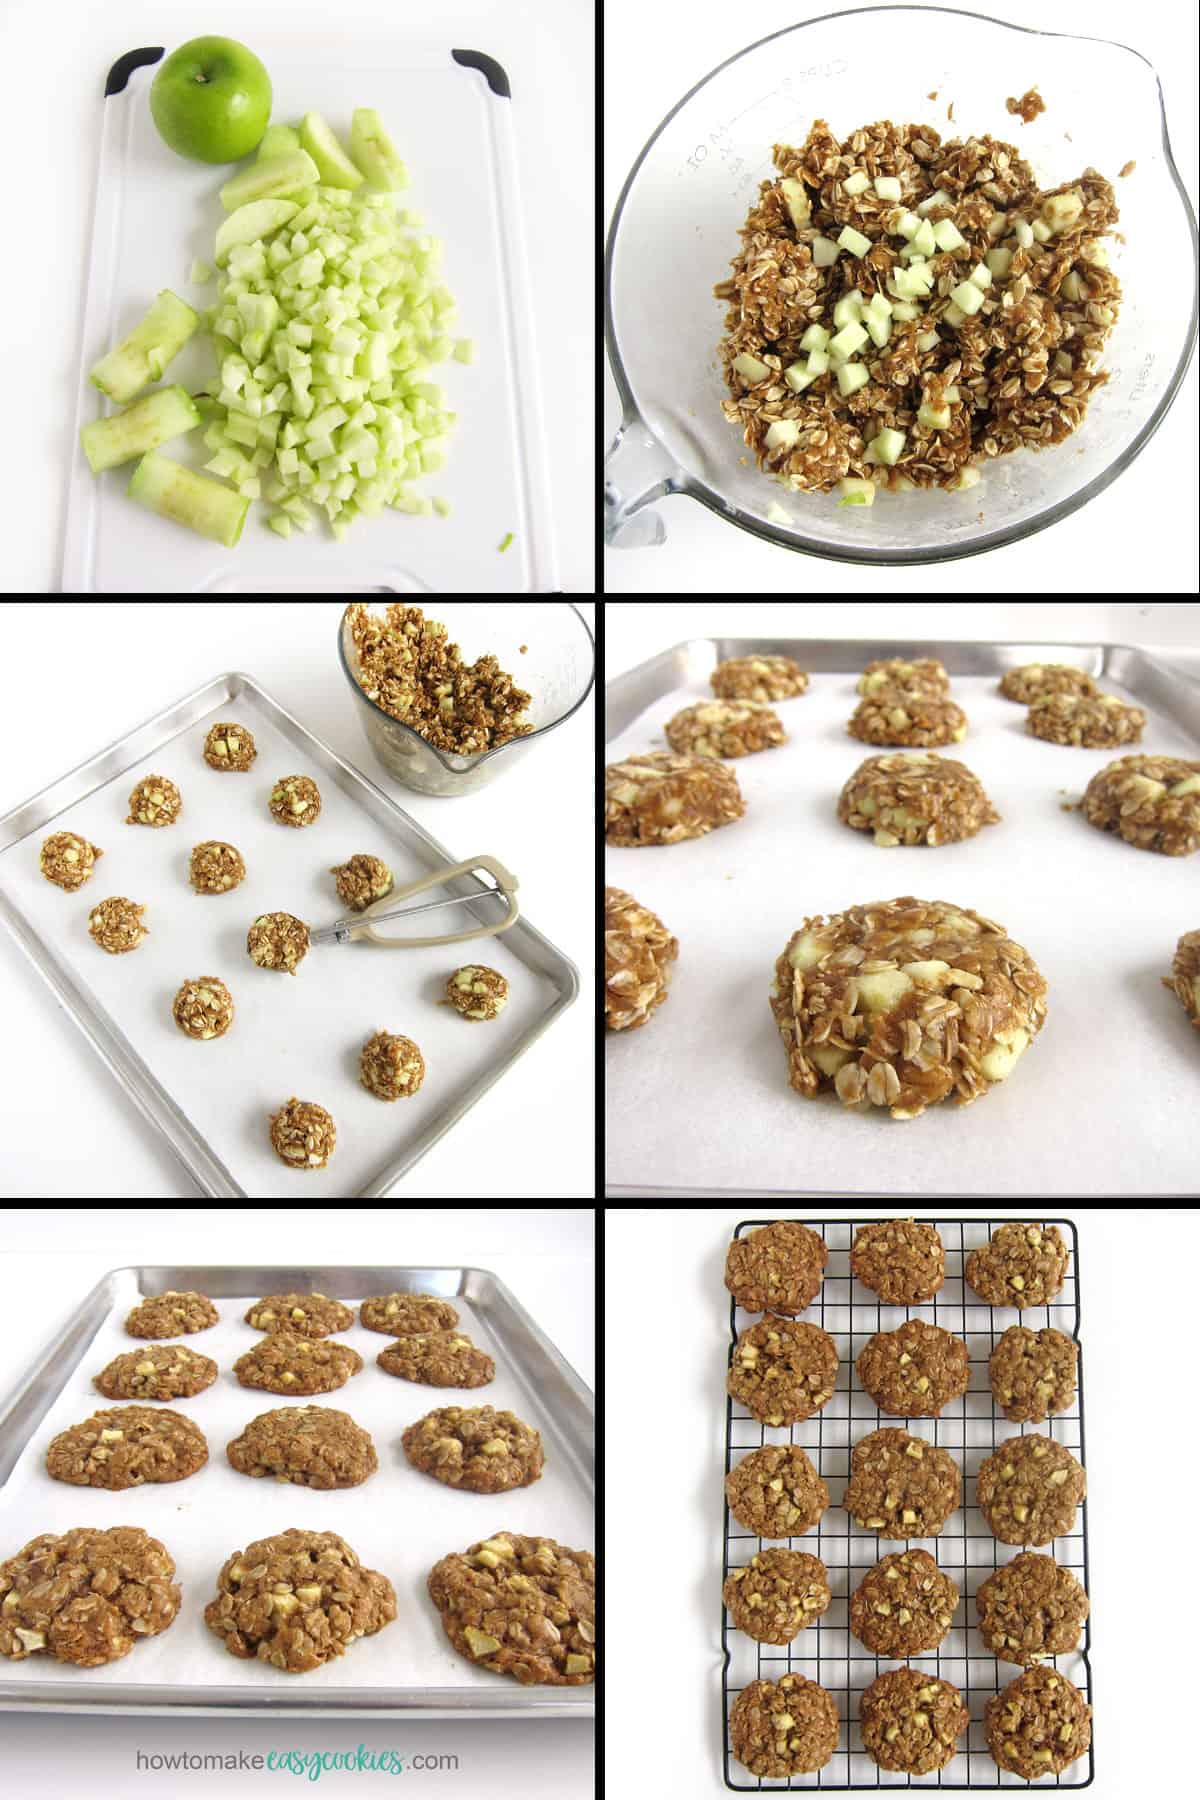 Mix diced Granny Smith apples into oatmeal cookie dough, then scoop out onto baking sheets, bake and cool.